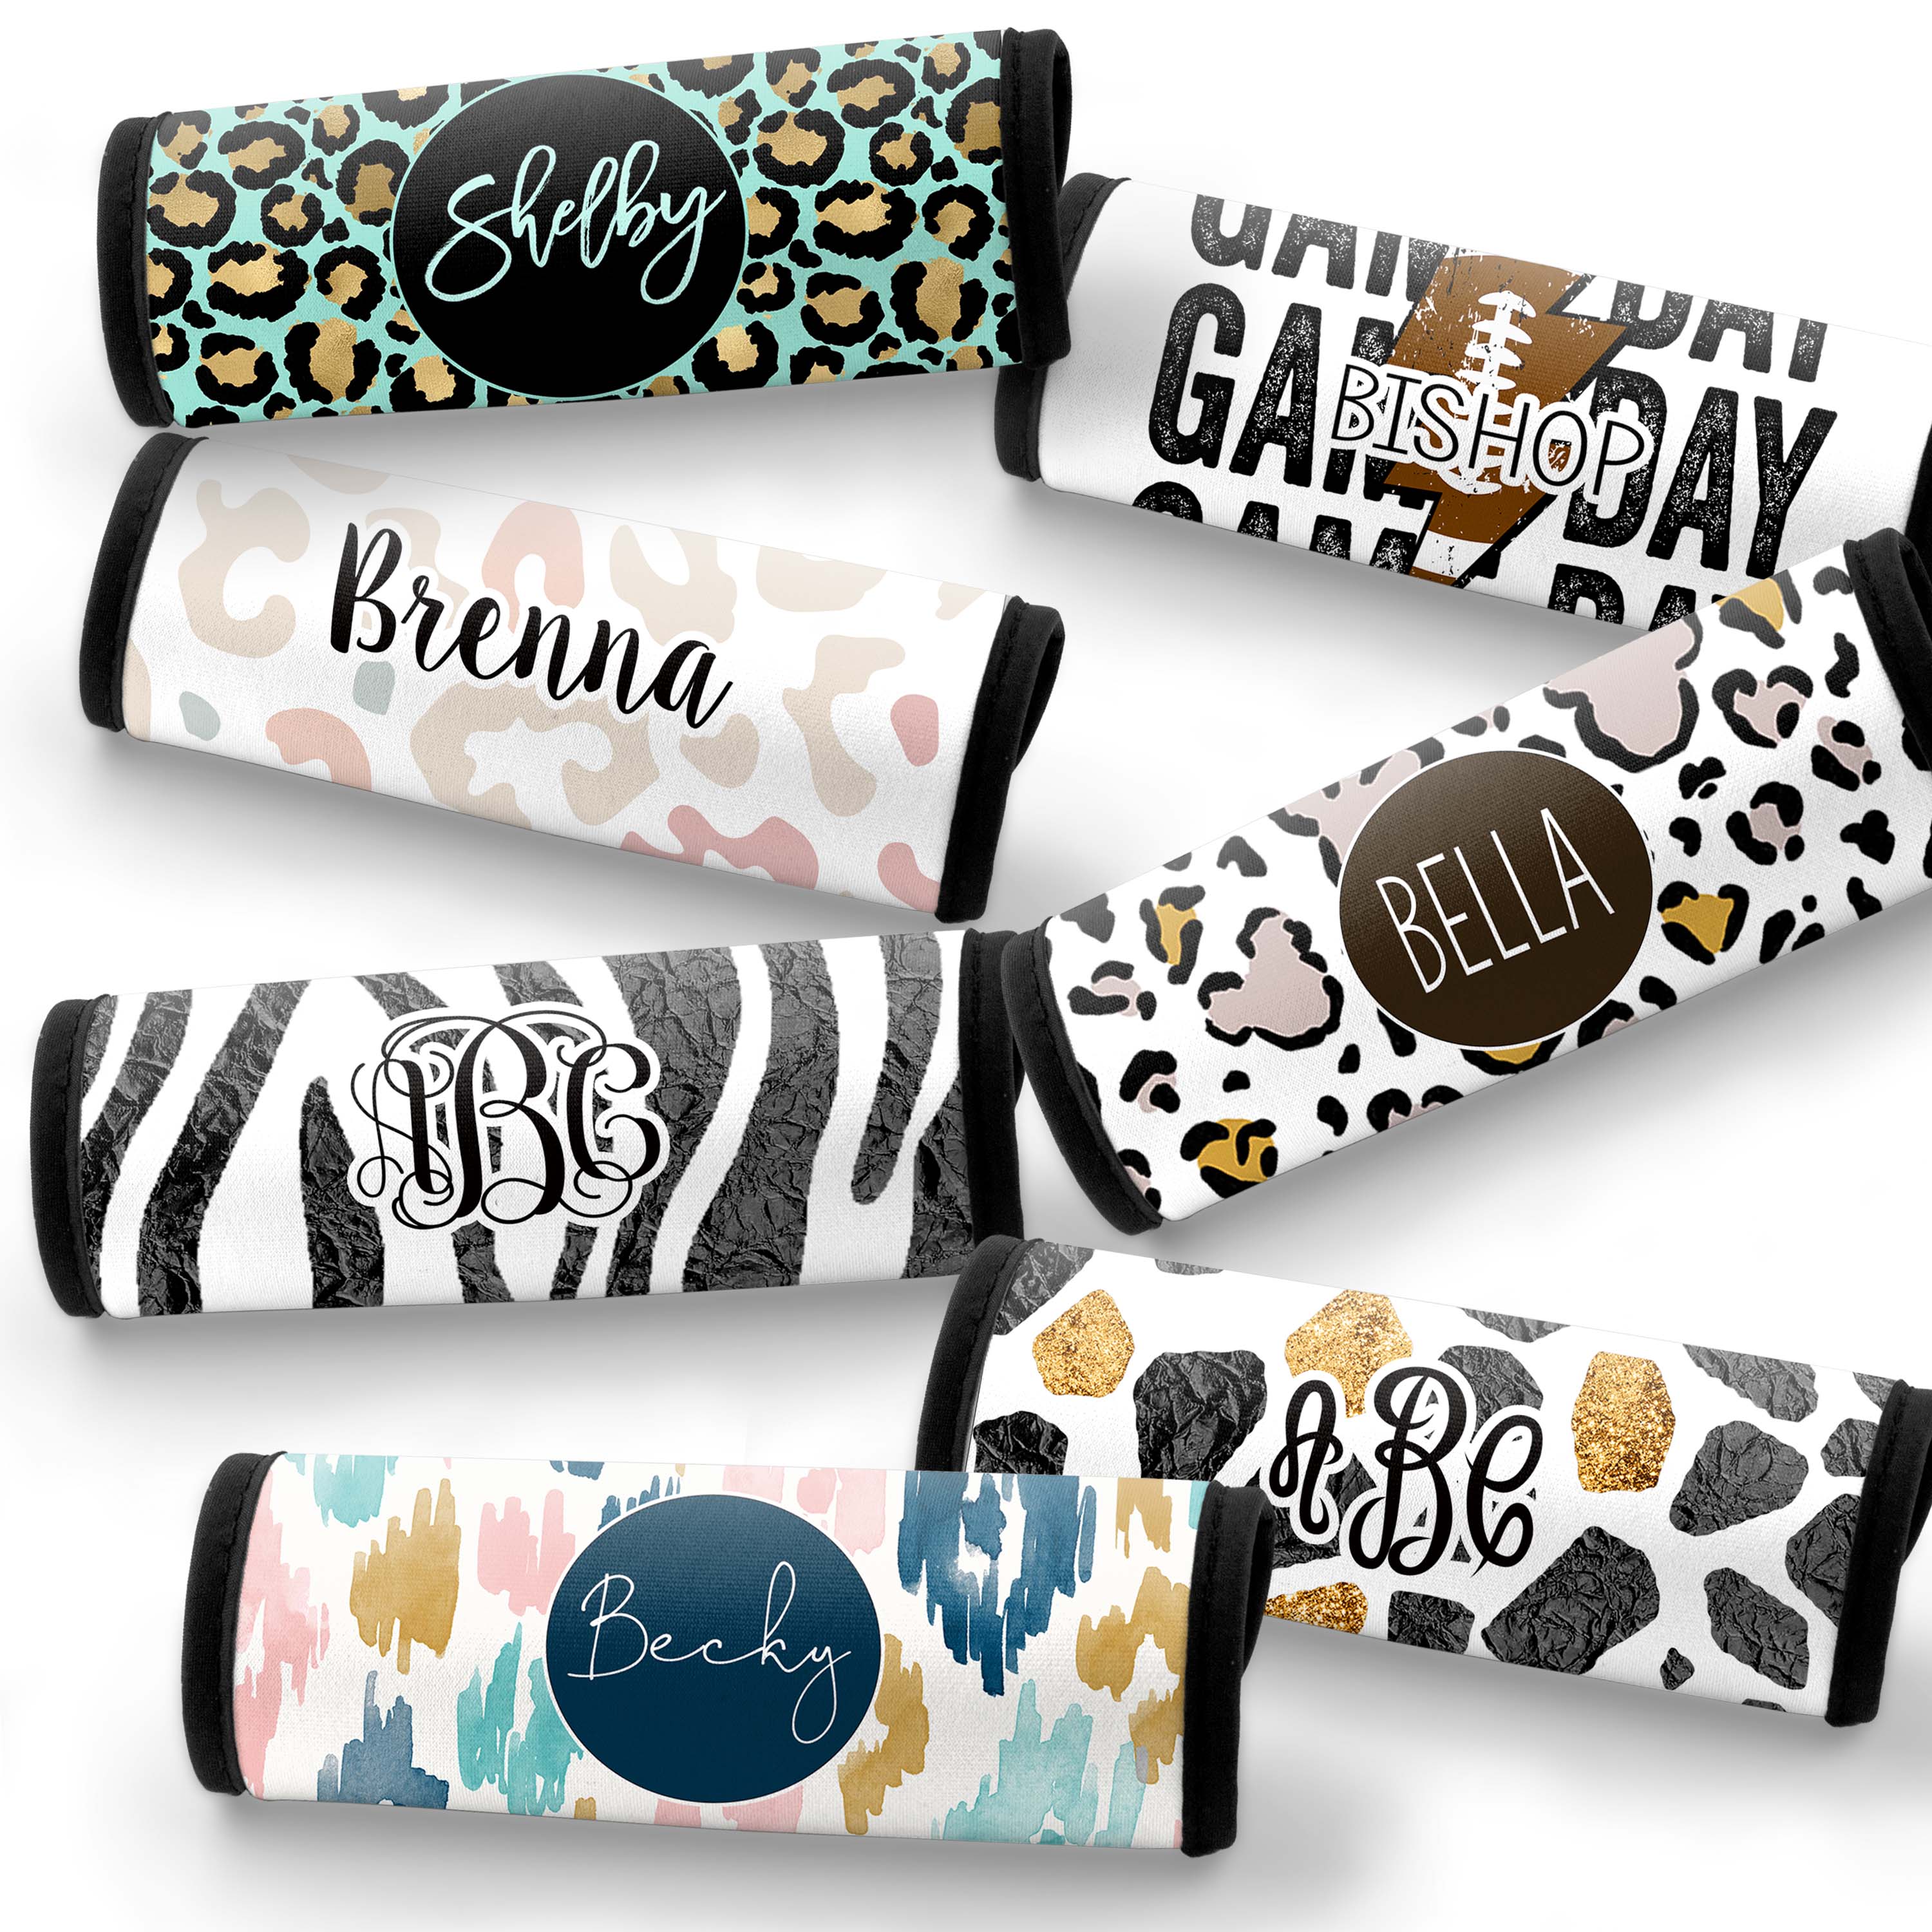 Personalized Travel Accessory
Personalized Luggage ID Wrap